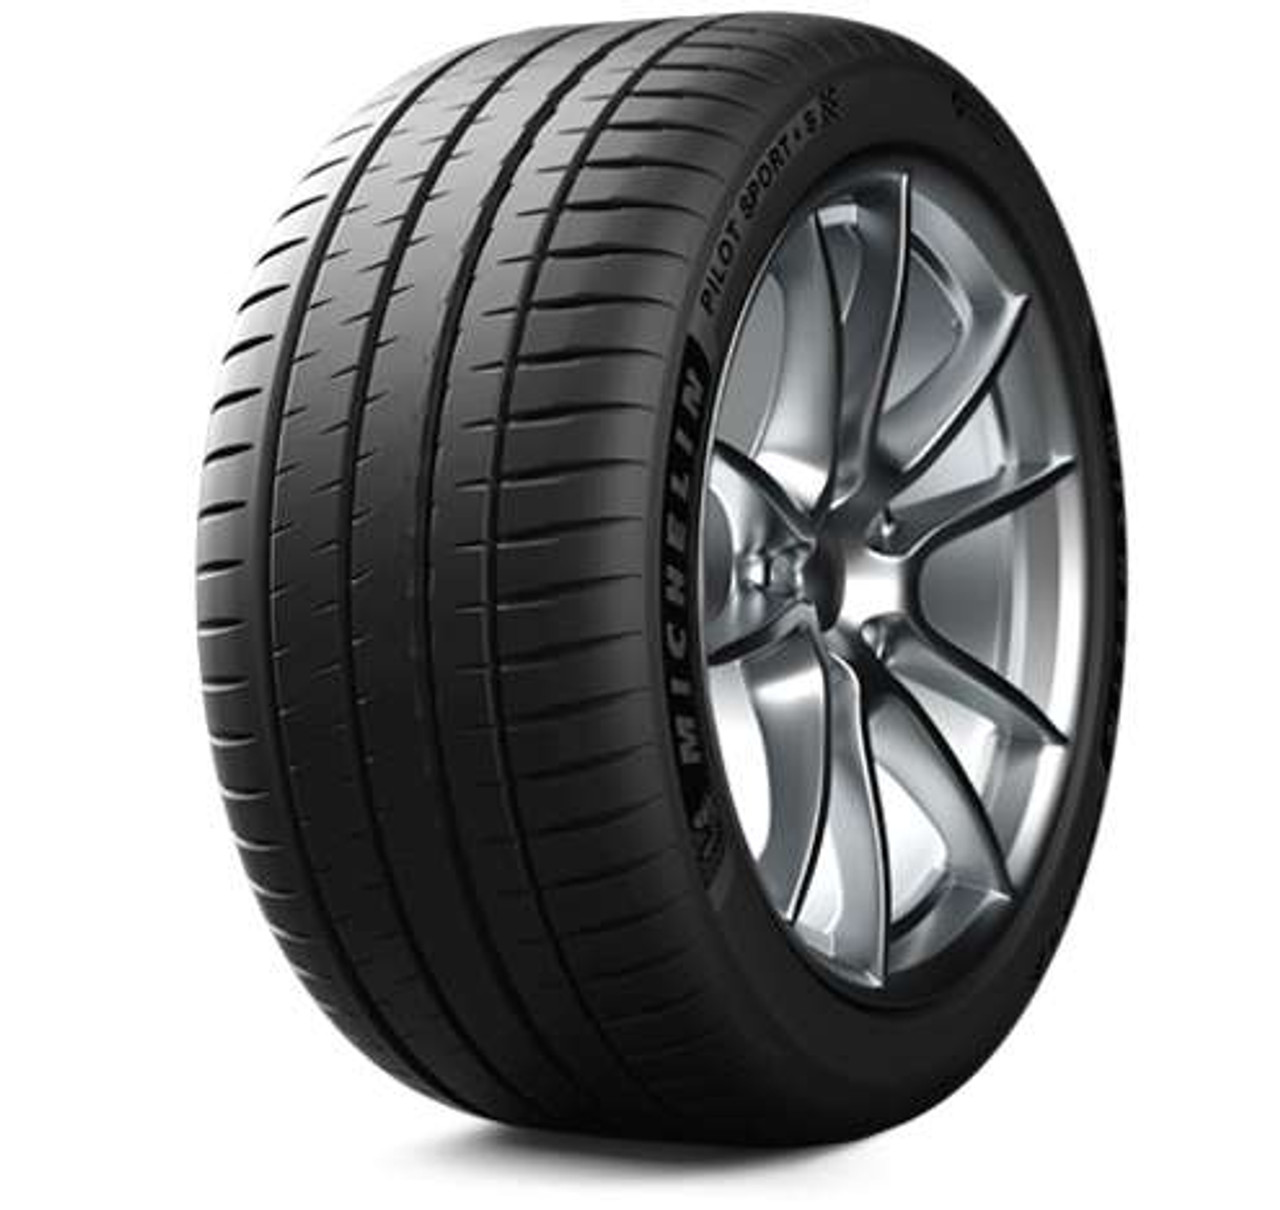 Michelin Pilot Sport 4 S Tire 235/45ZR18 98 300AAA BW - FREE T-SHIRT  INCLUDED!